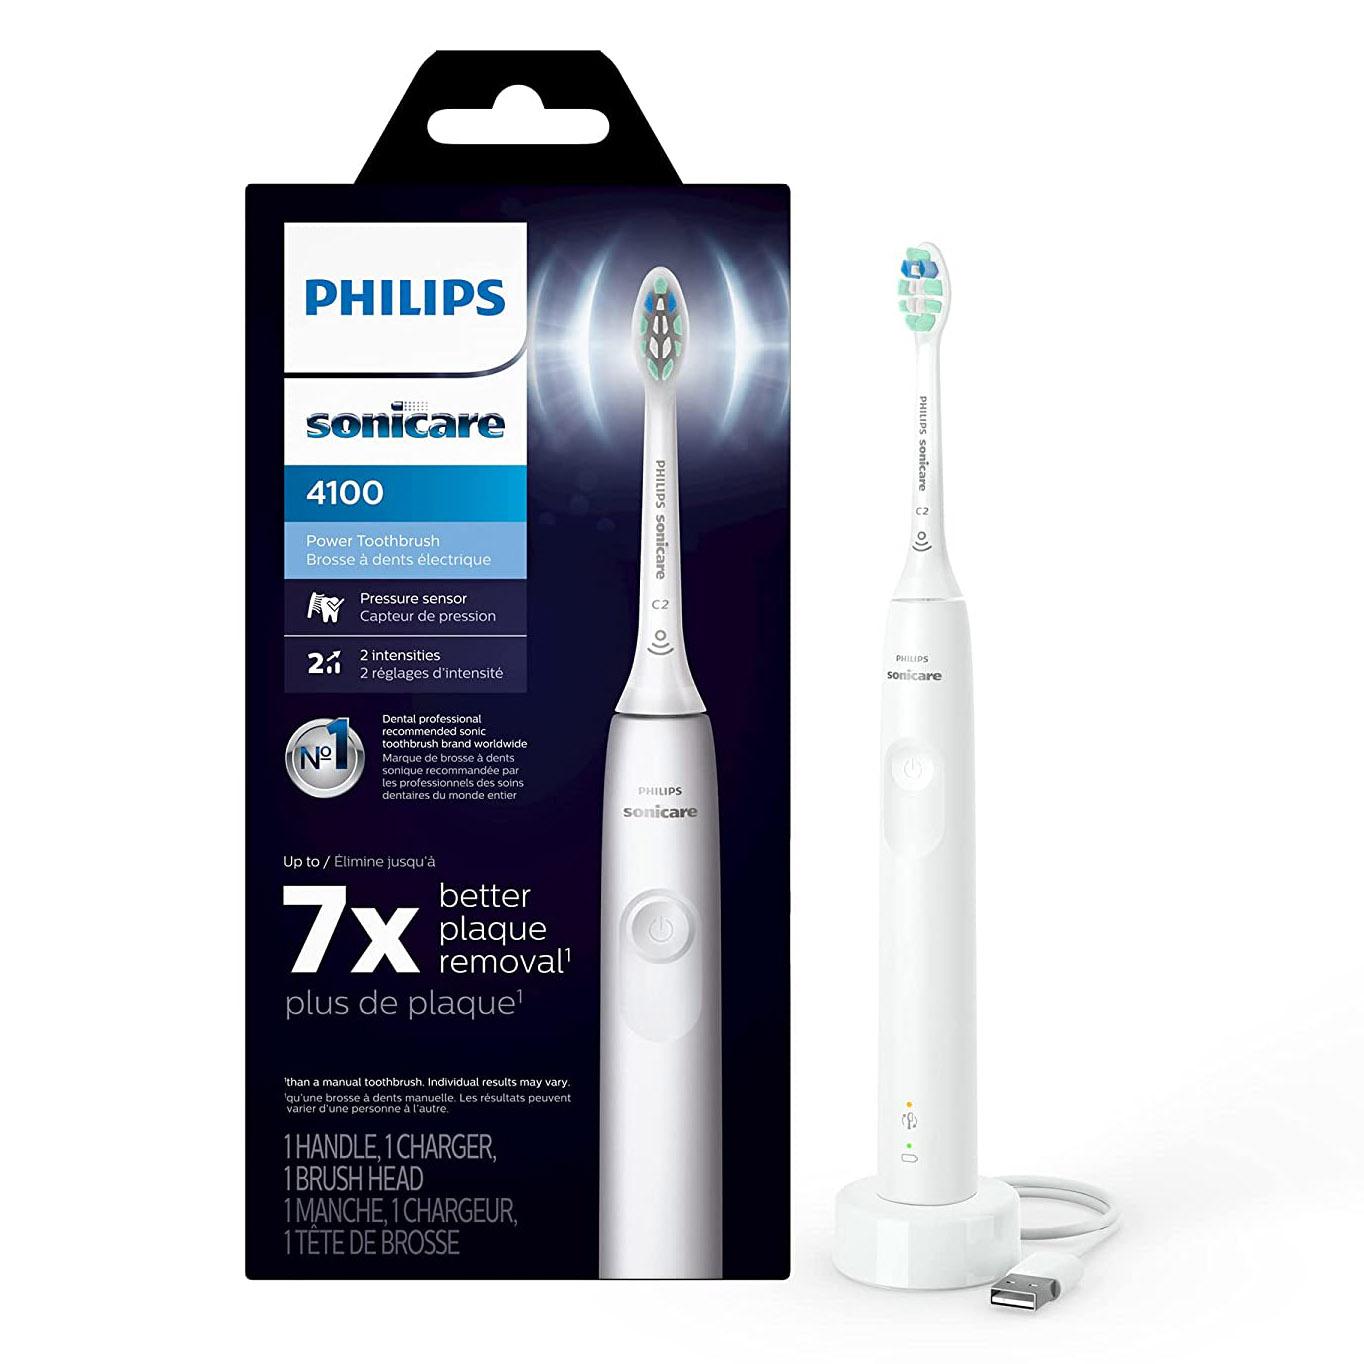 Philips Sonicare ProtectiveClean 4100 Rechargeable Electric Toothbrush for $29.99